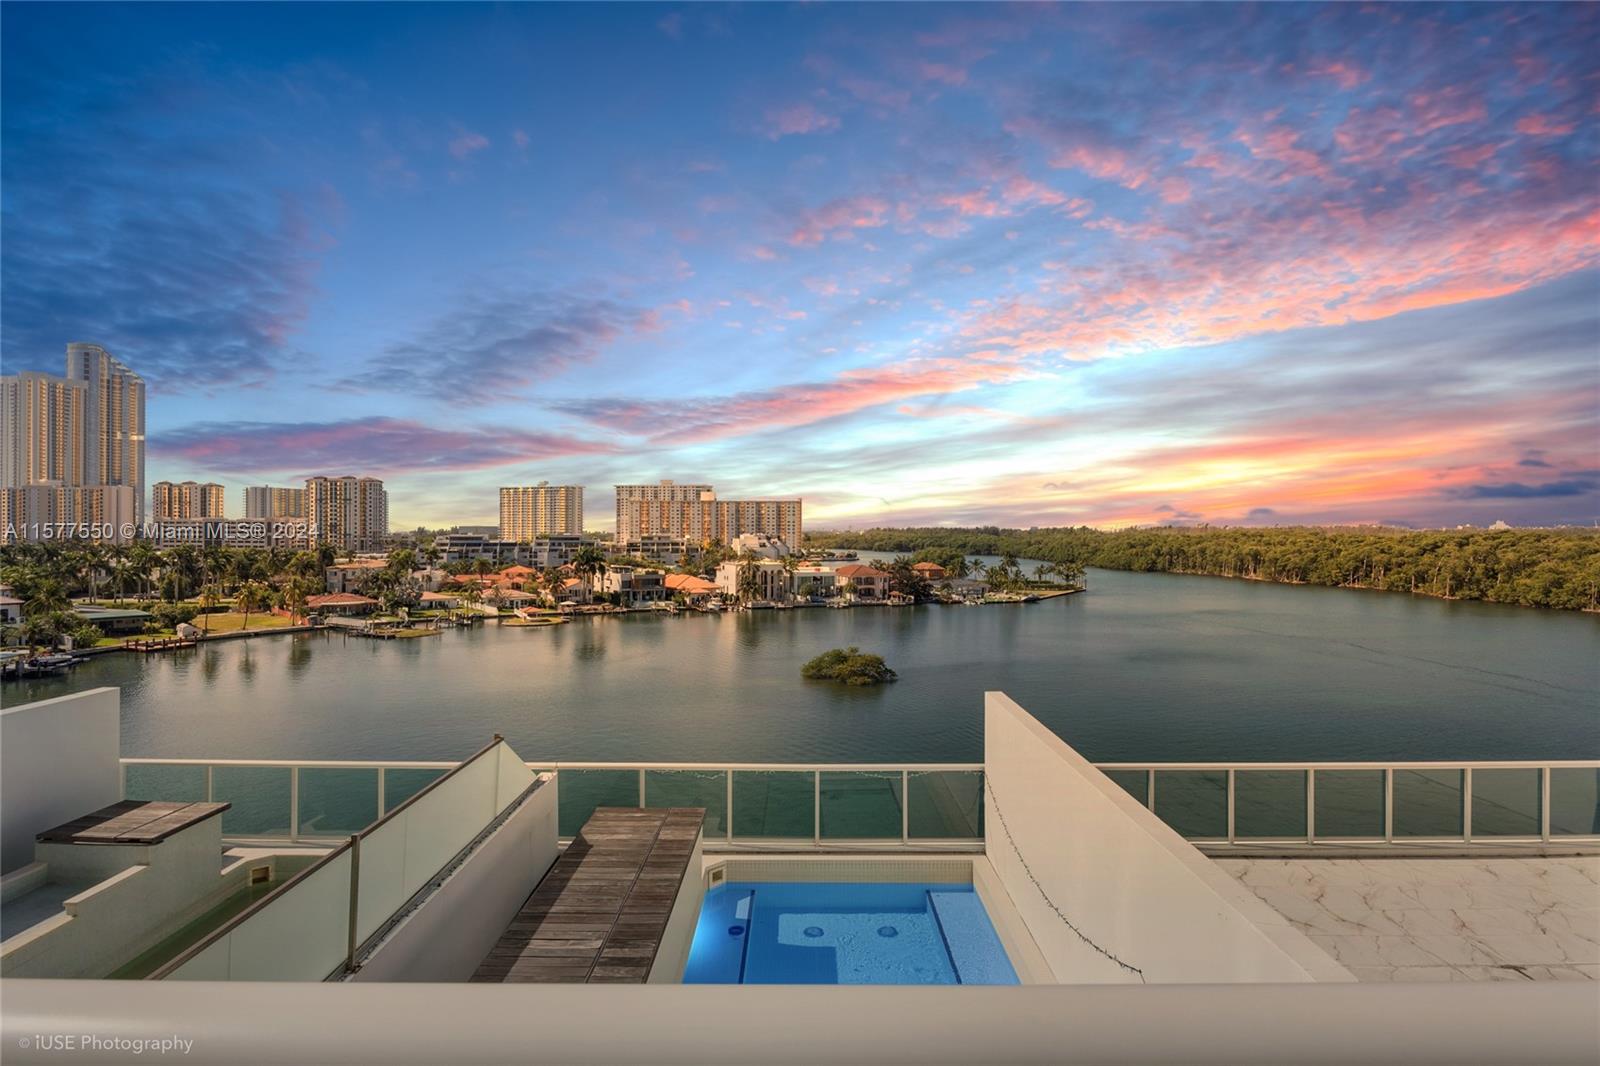 Don't miss the opportunity to purchase an amazing 3 bedroom/2 bathroom and half with an amazing view! Walking distance to the beach, shoppings and restaurants. Best price. Located on the very desirable Sunny Isles Beach, this unit is finished with the Italian furniture. A must see. Open kitchen with  water view. Marina is available managed by a third party. Tennis courts, pool, sauna, gym. 2 assigned parking spaces plus storage.Very private floor plan with plenty of storage. Valet and concierge 24/7. Bar at the pool area, beach 2 blocks away.
The apartment is also listed for rent at $6,900.00